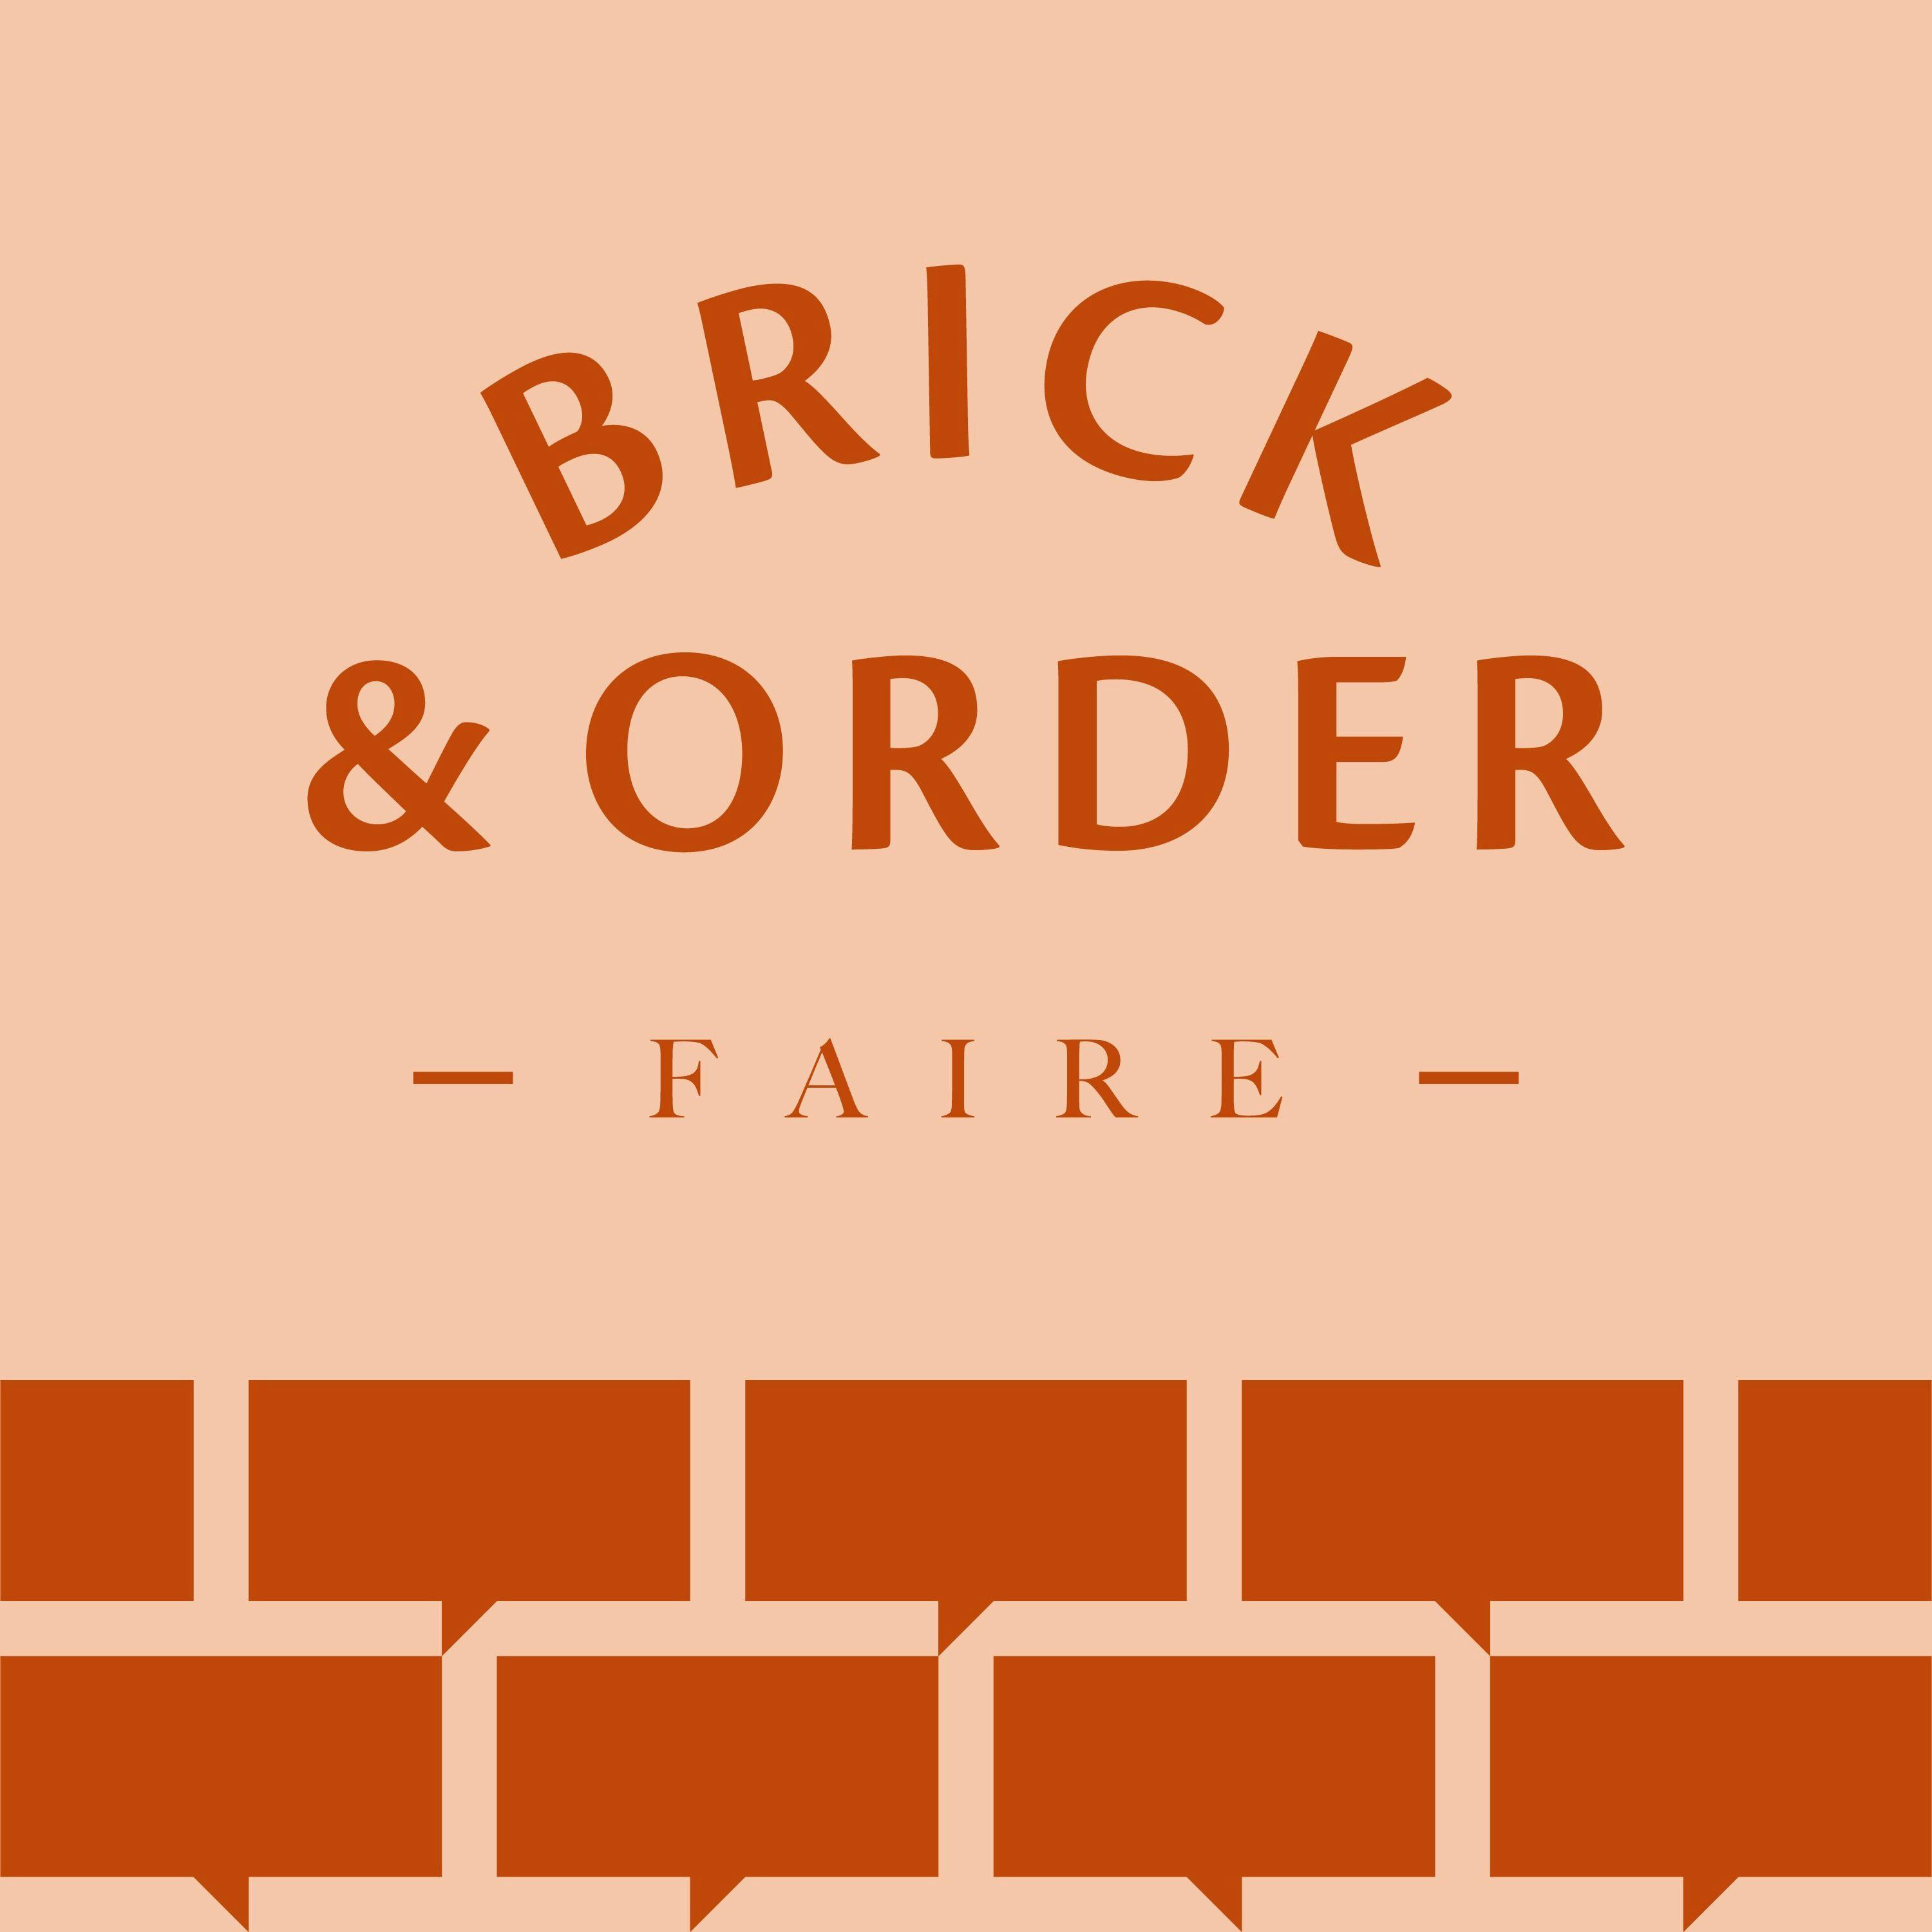 Two new brick & mortar retailers Open with Faire